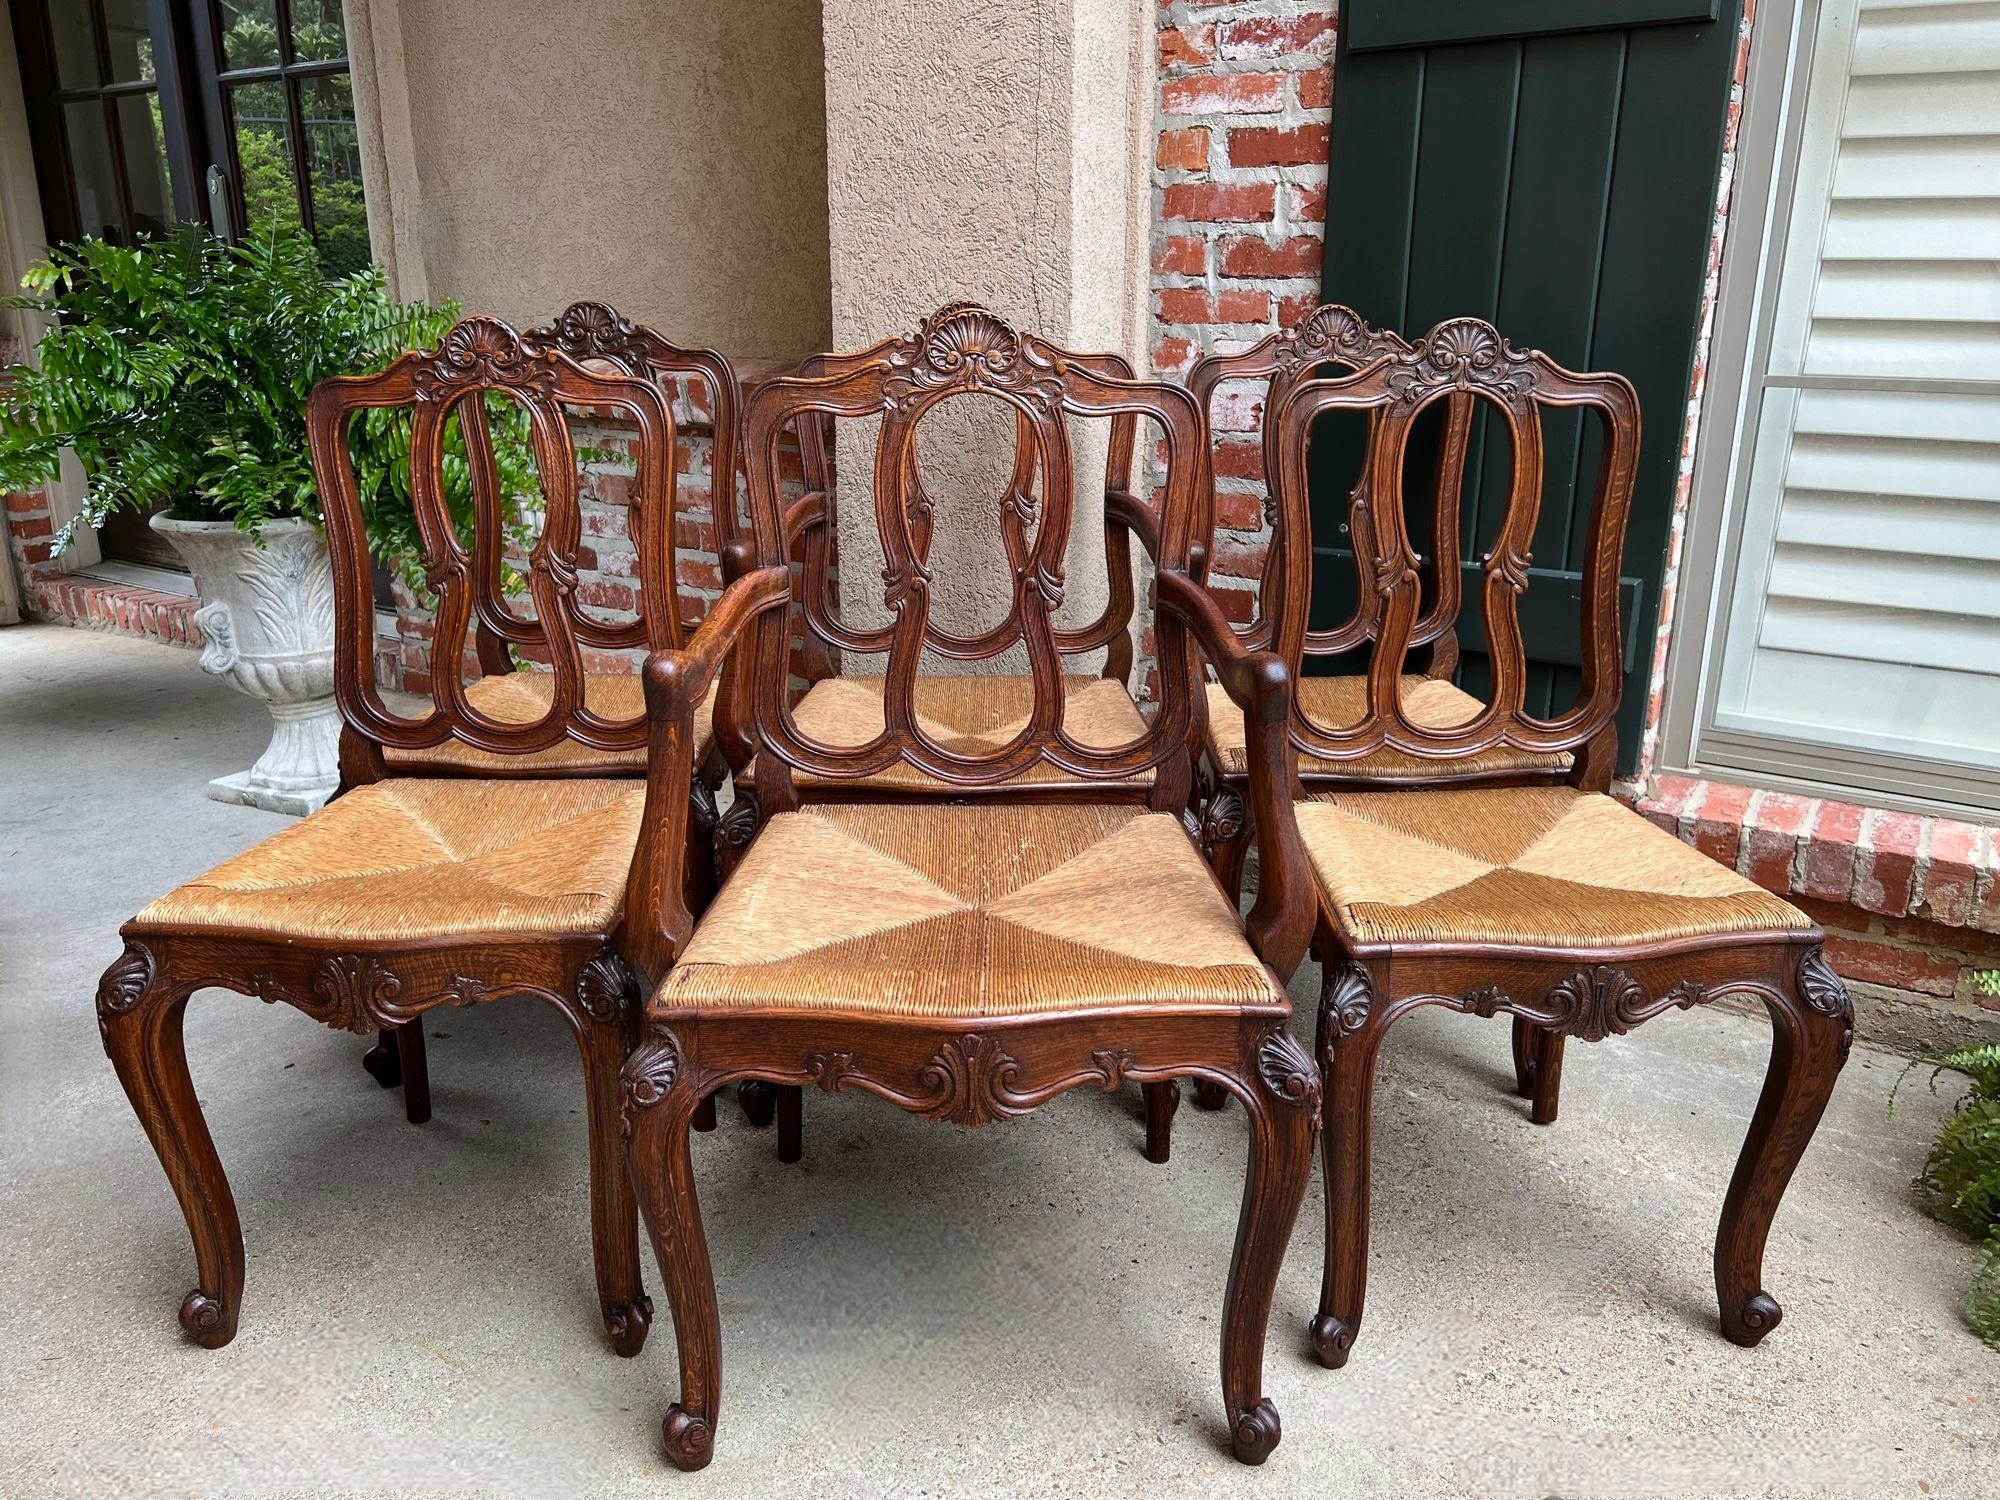 Set 6 Antique French Dining Chairs Carved Oak Rush Seat Louis XV Arm and Side Chairs.

Direct from France, a superb set of six antique French dining chairs, with classic French style…perfect for a kitchen OR dining room. Please note this matching